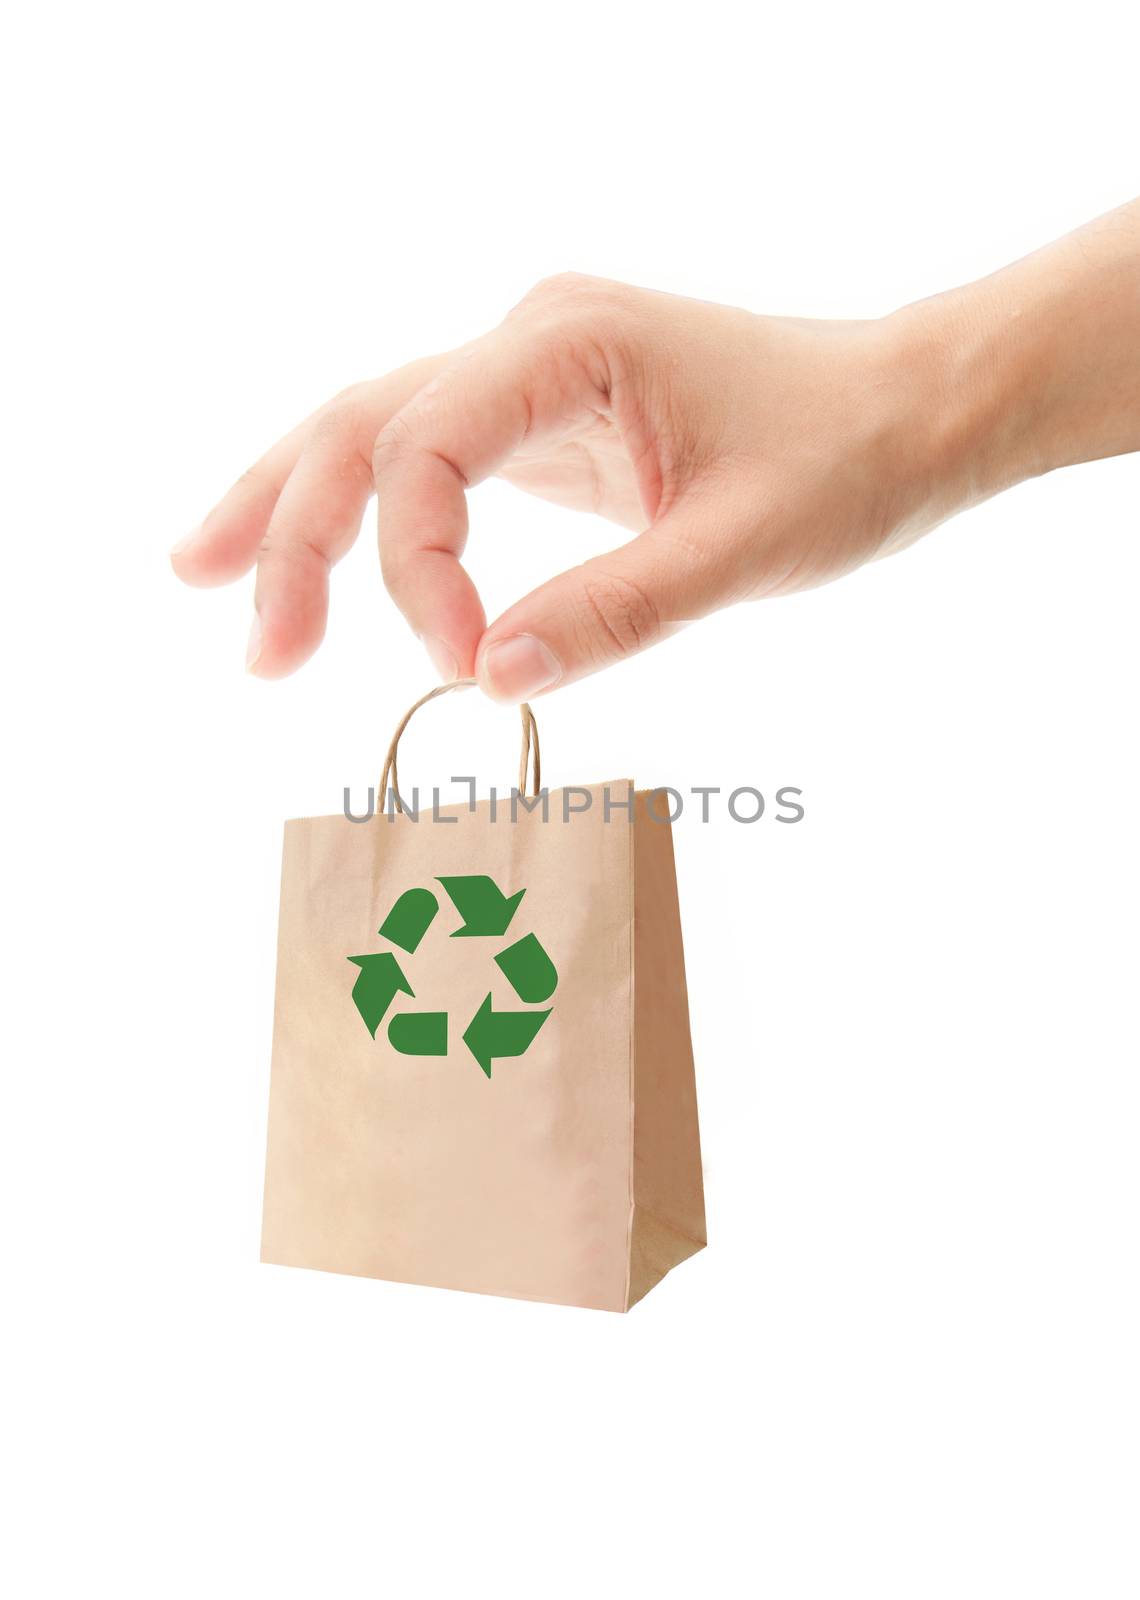 Hand holding a small paper bag with a recycling symbol